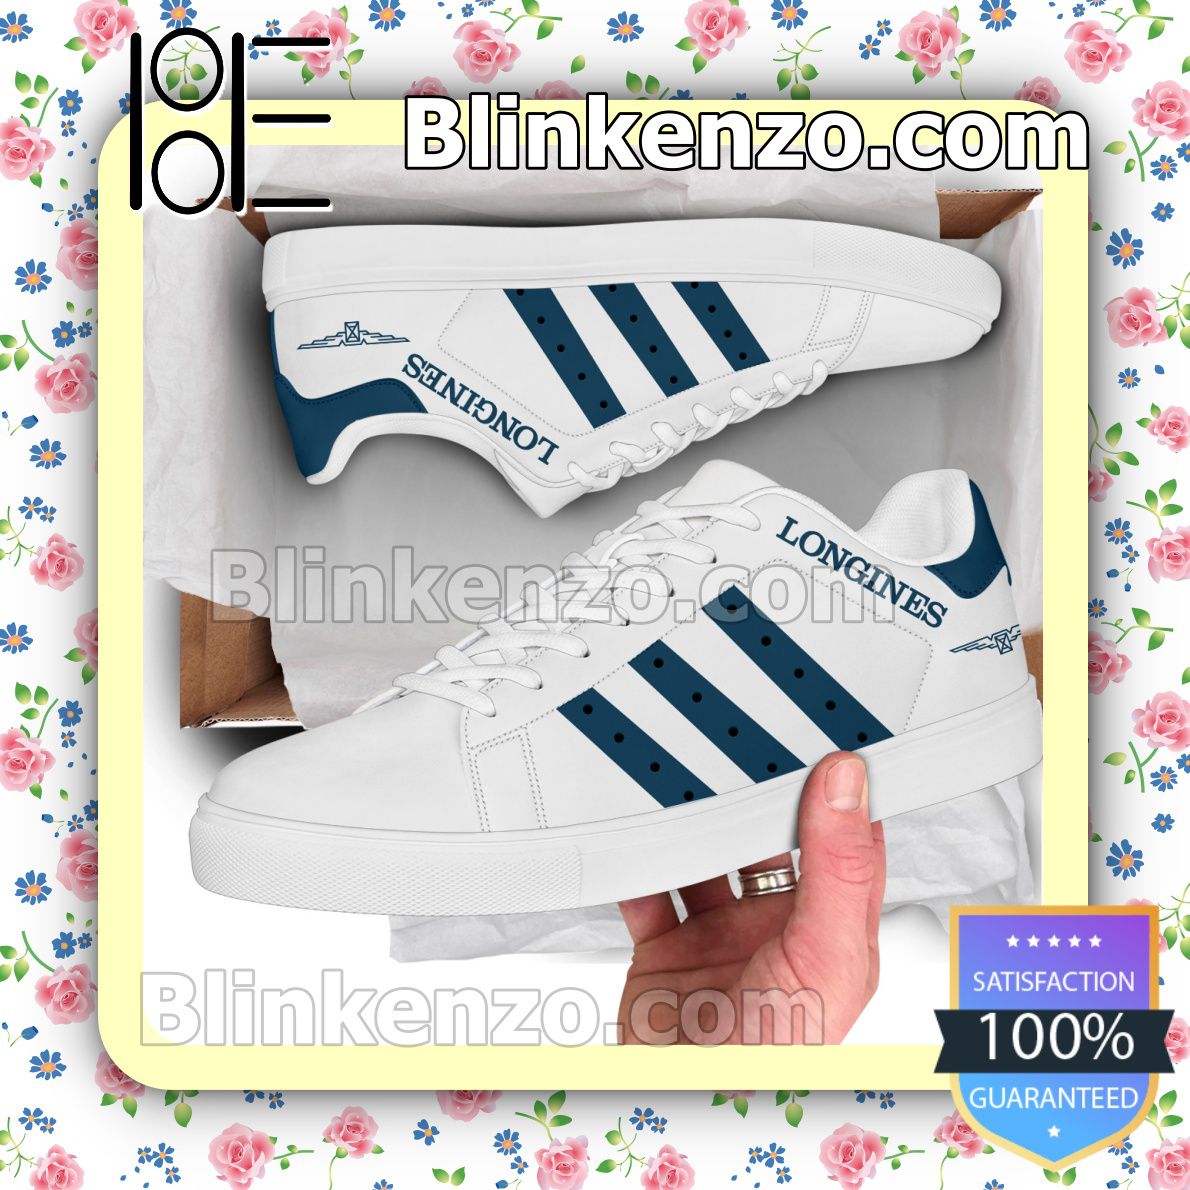 Longines Company Brand Adidas Low Top Shoes